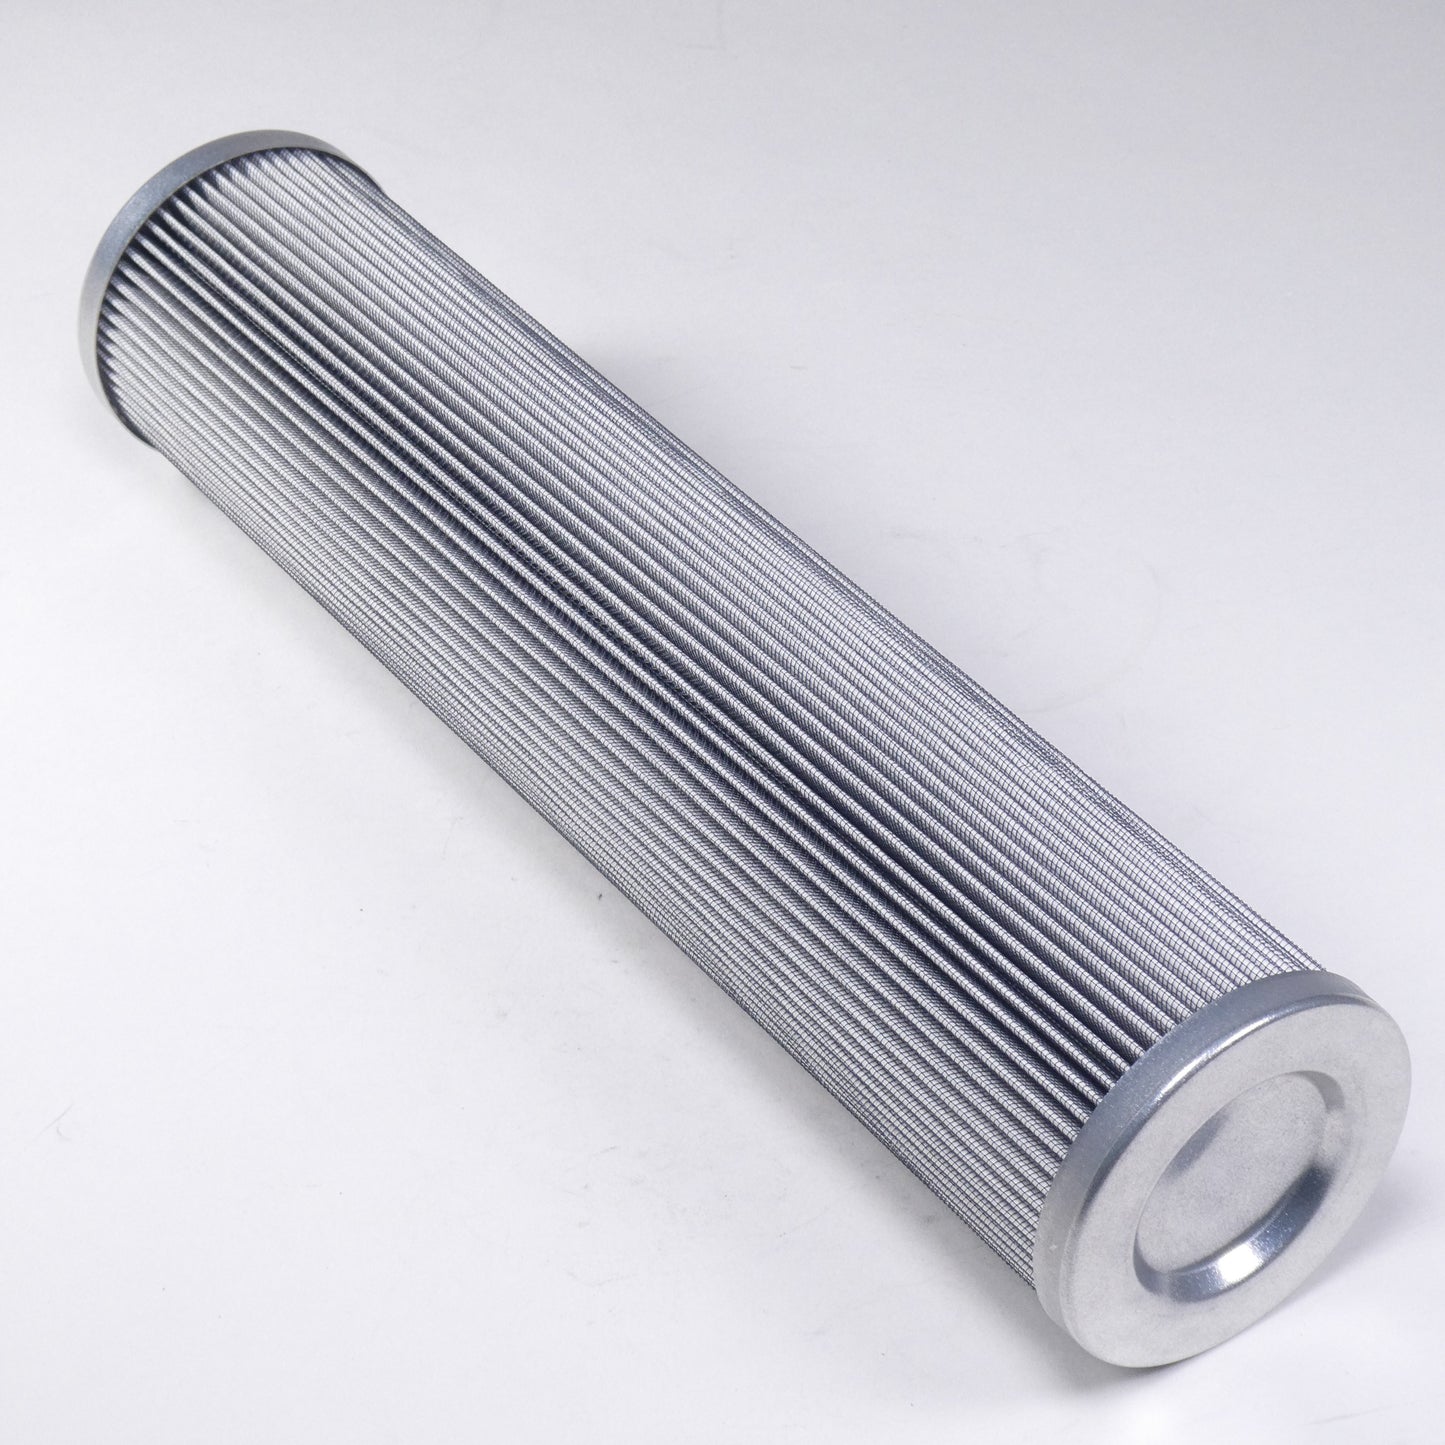 Hydrafil Replacement Filter Element for Filtersoft H8916MFB